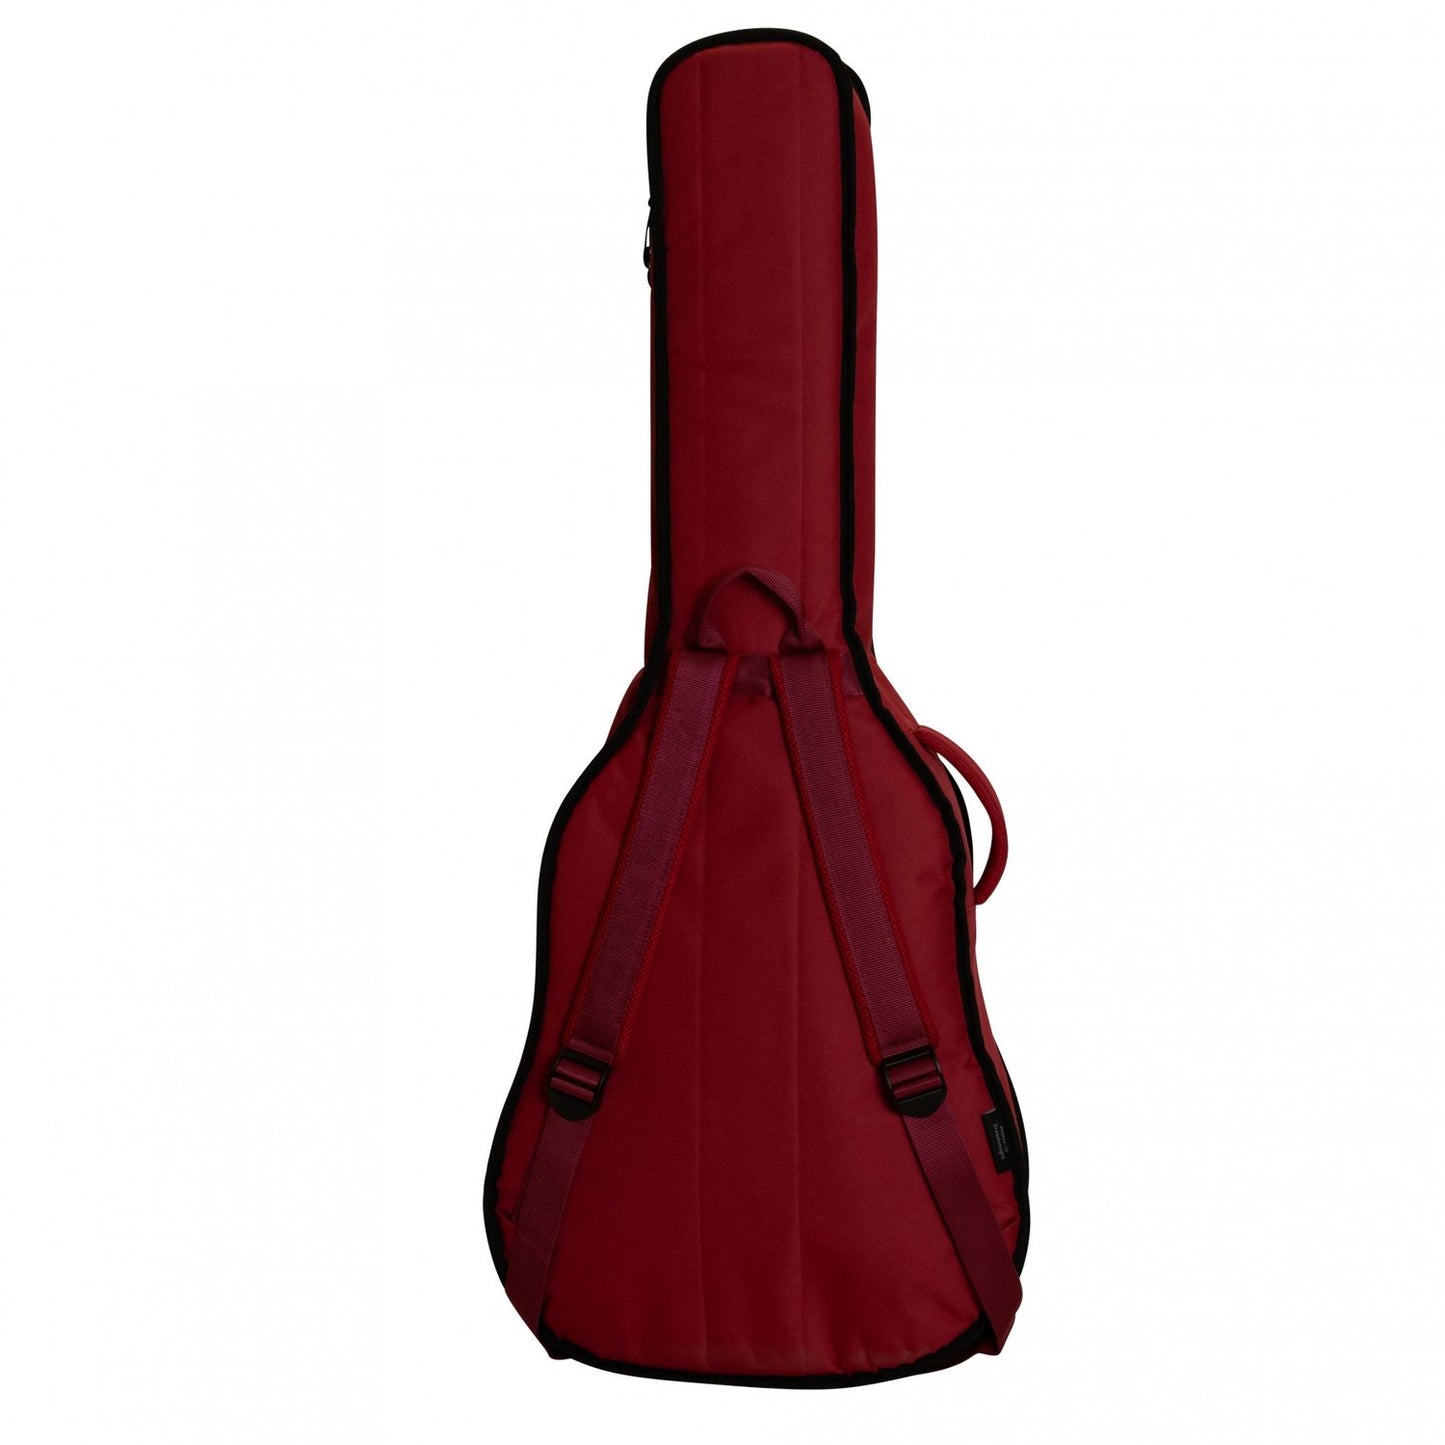 Ritter Davos Dreadnought Gig Bag - Spicey Red